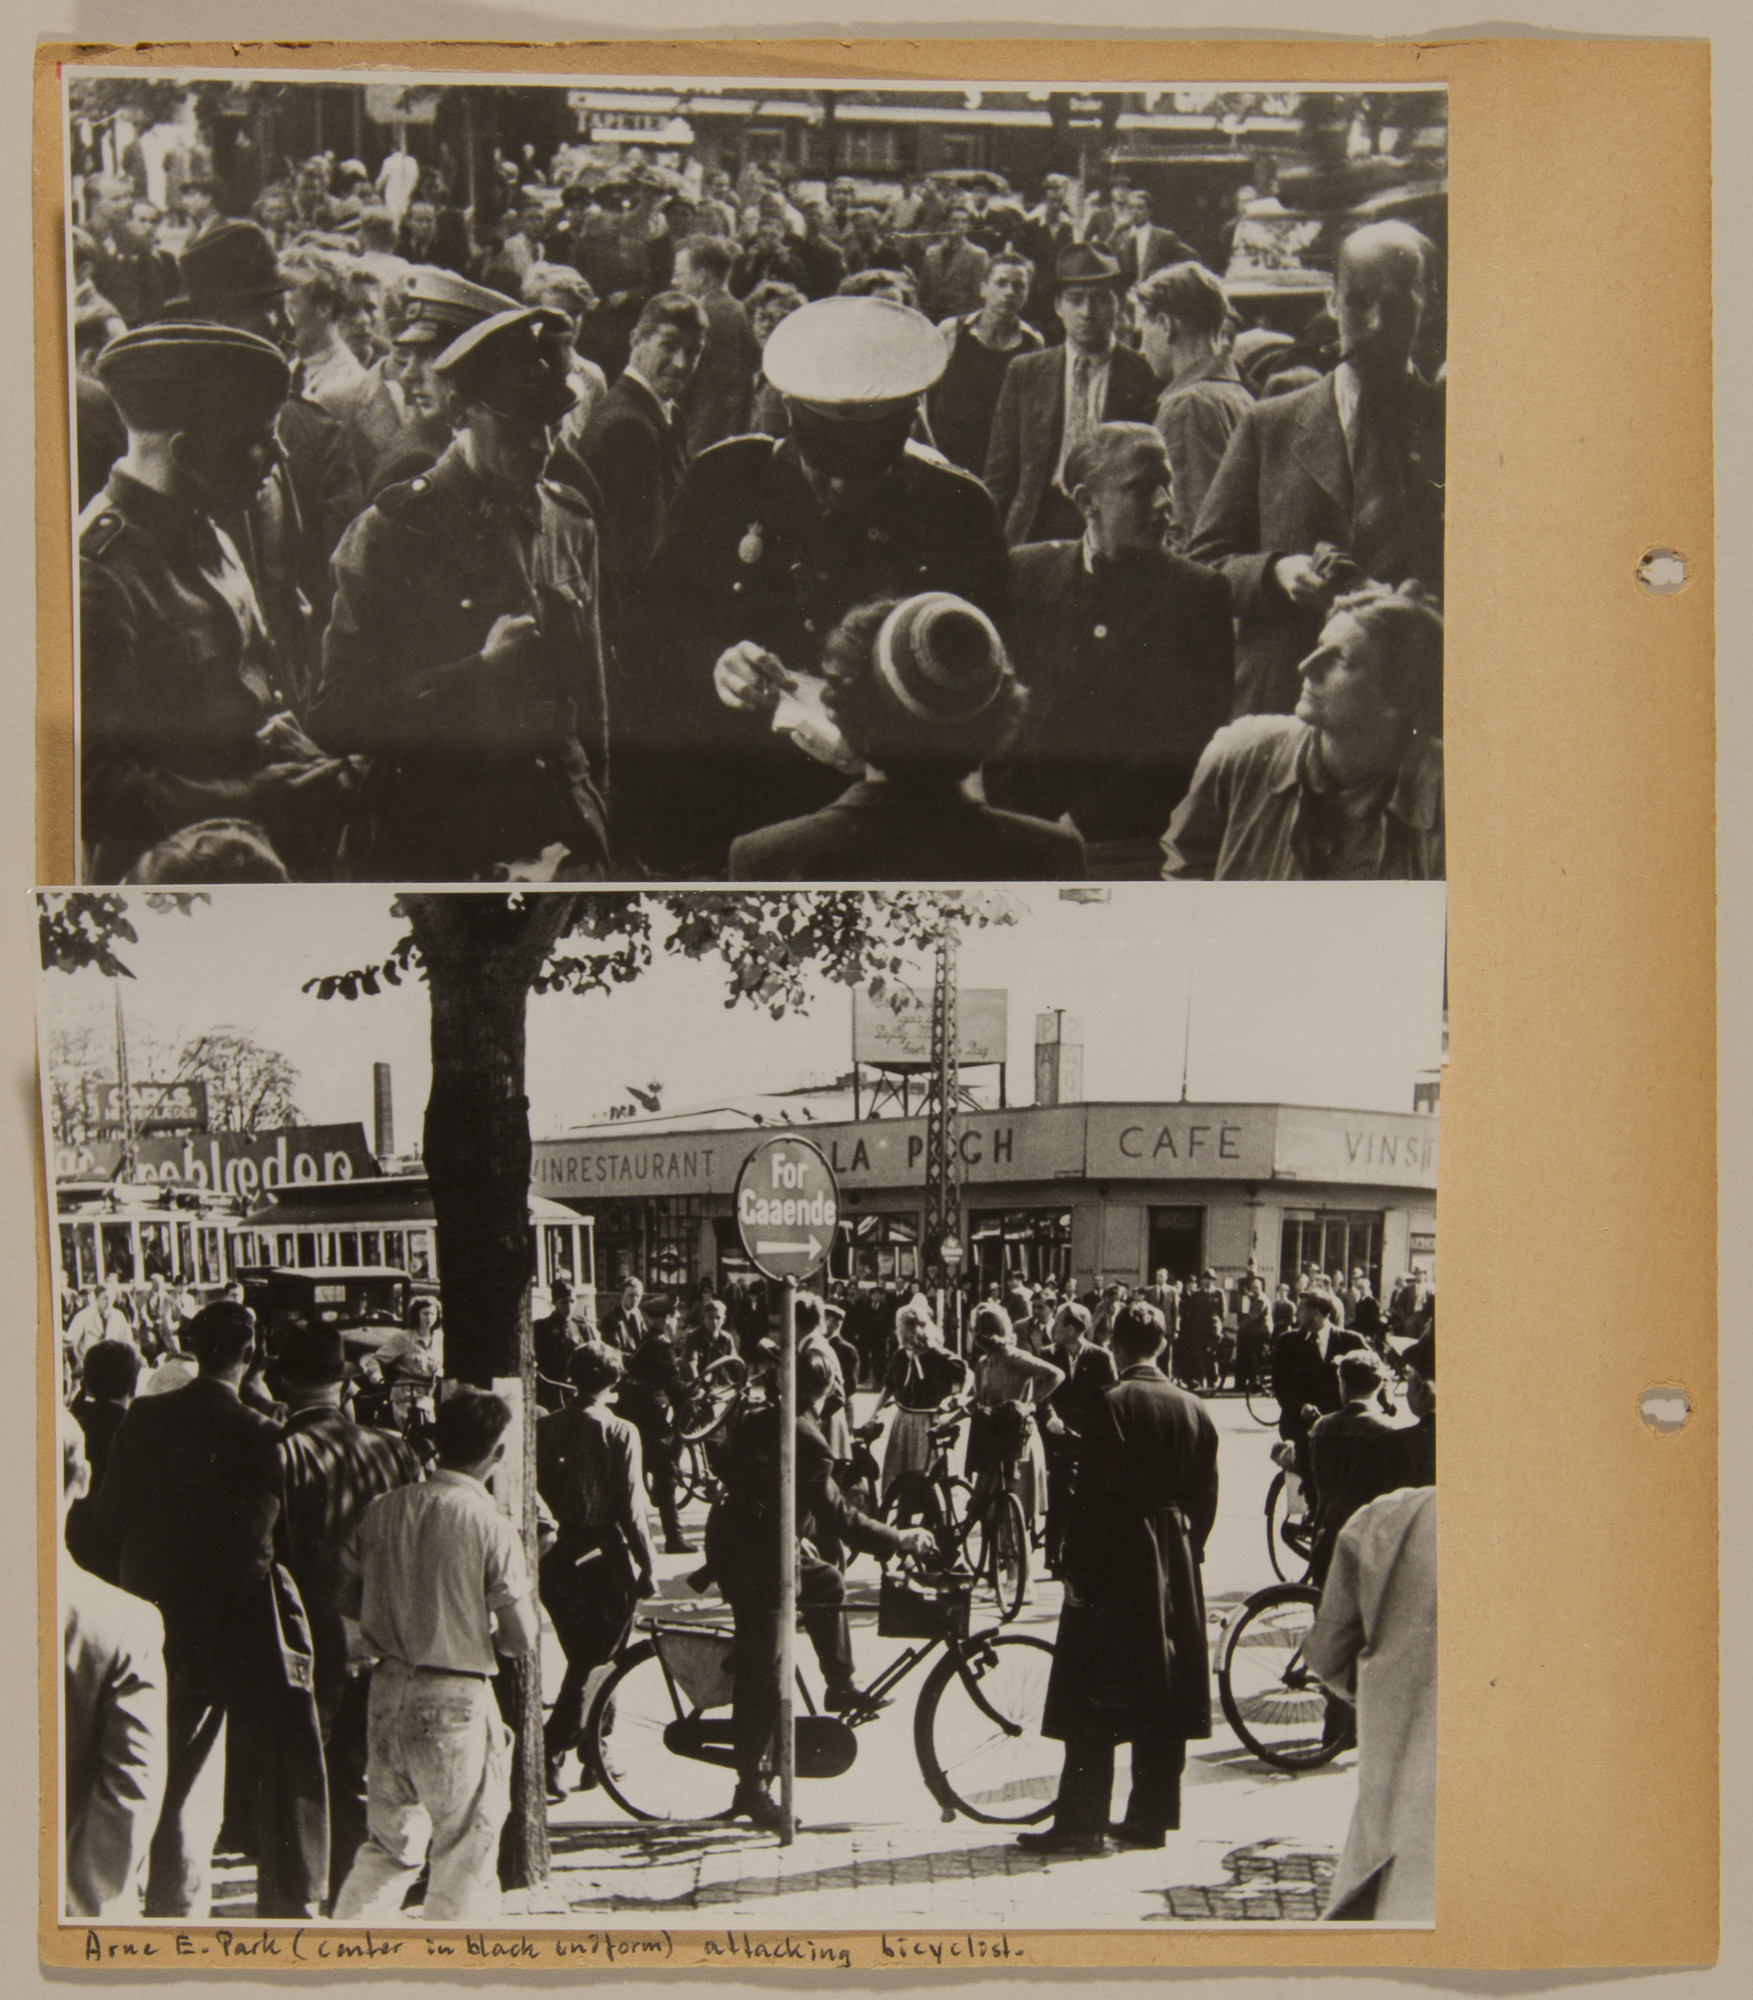 Page from volume four of a set of scrapbooks compiled by Bjorn Sibbern, a Danish policeman and resistance member, documenting the German occupation of Denmark.

The page contains photographs from a series showing German and Danish SS raids on civilians.

The man in the top photo with his back to the camera is probably being targetted because he is wearing a knitted cap with the emblem of the Royal British Airforce.